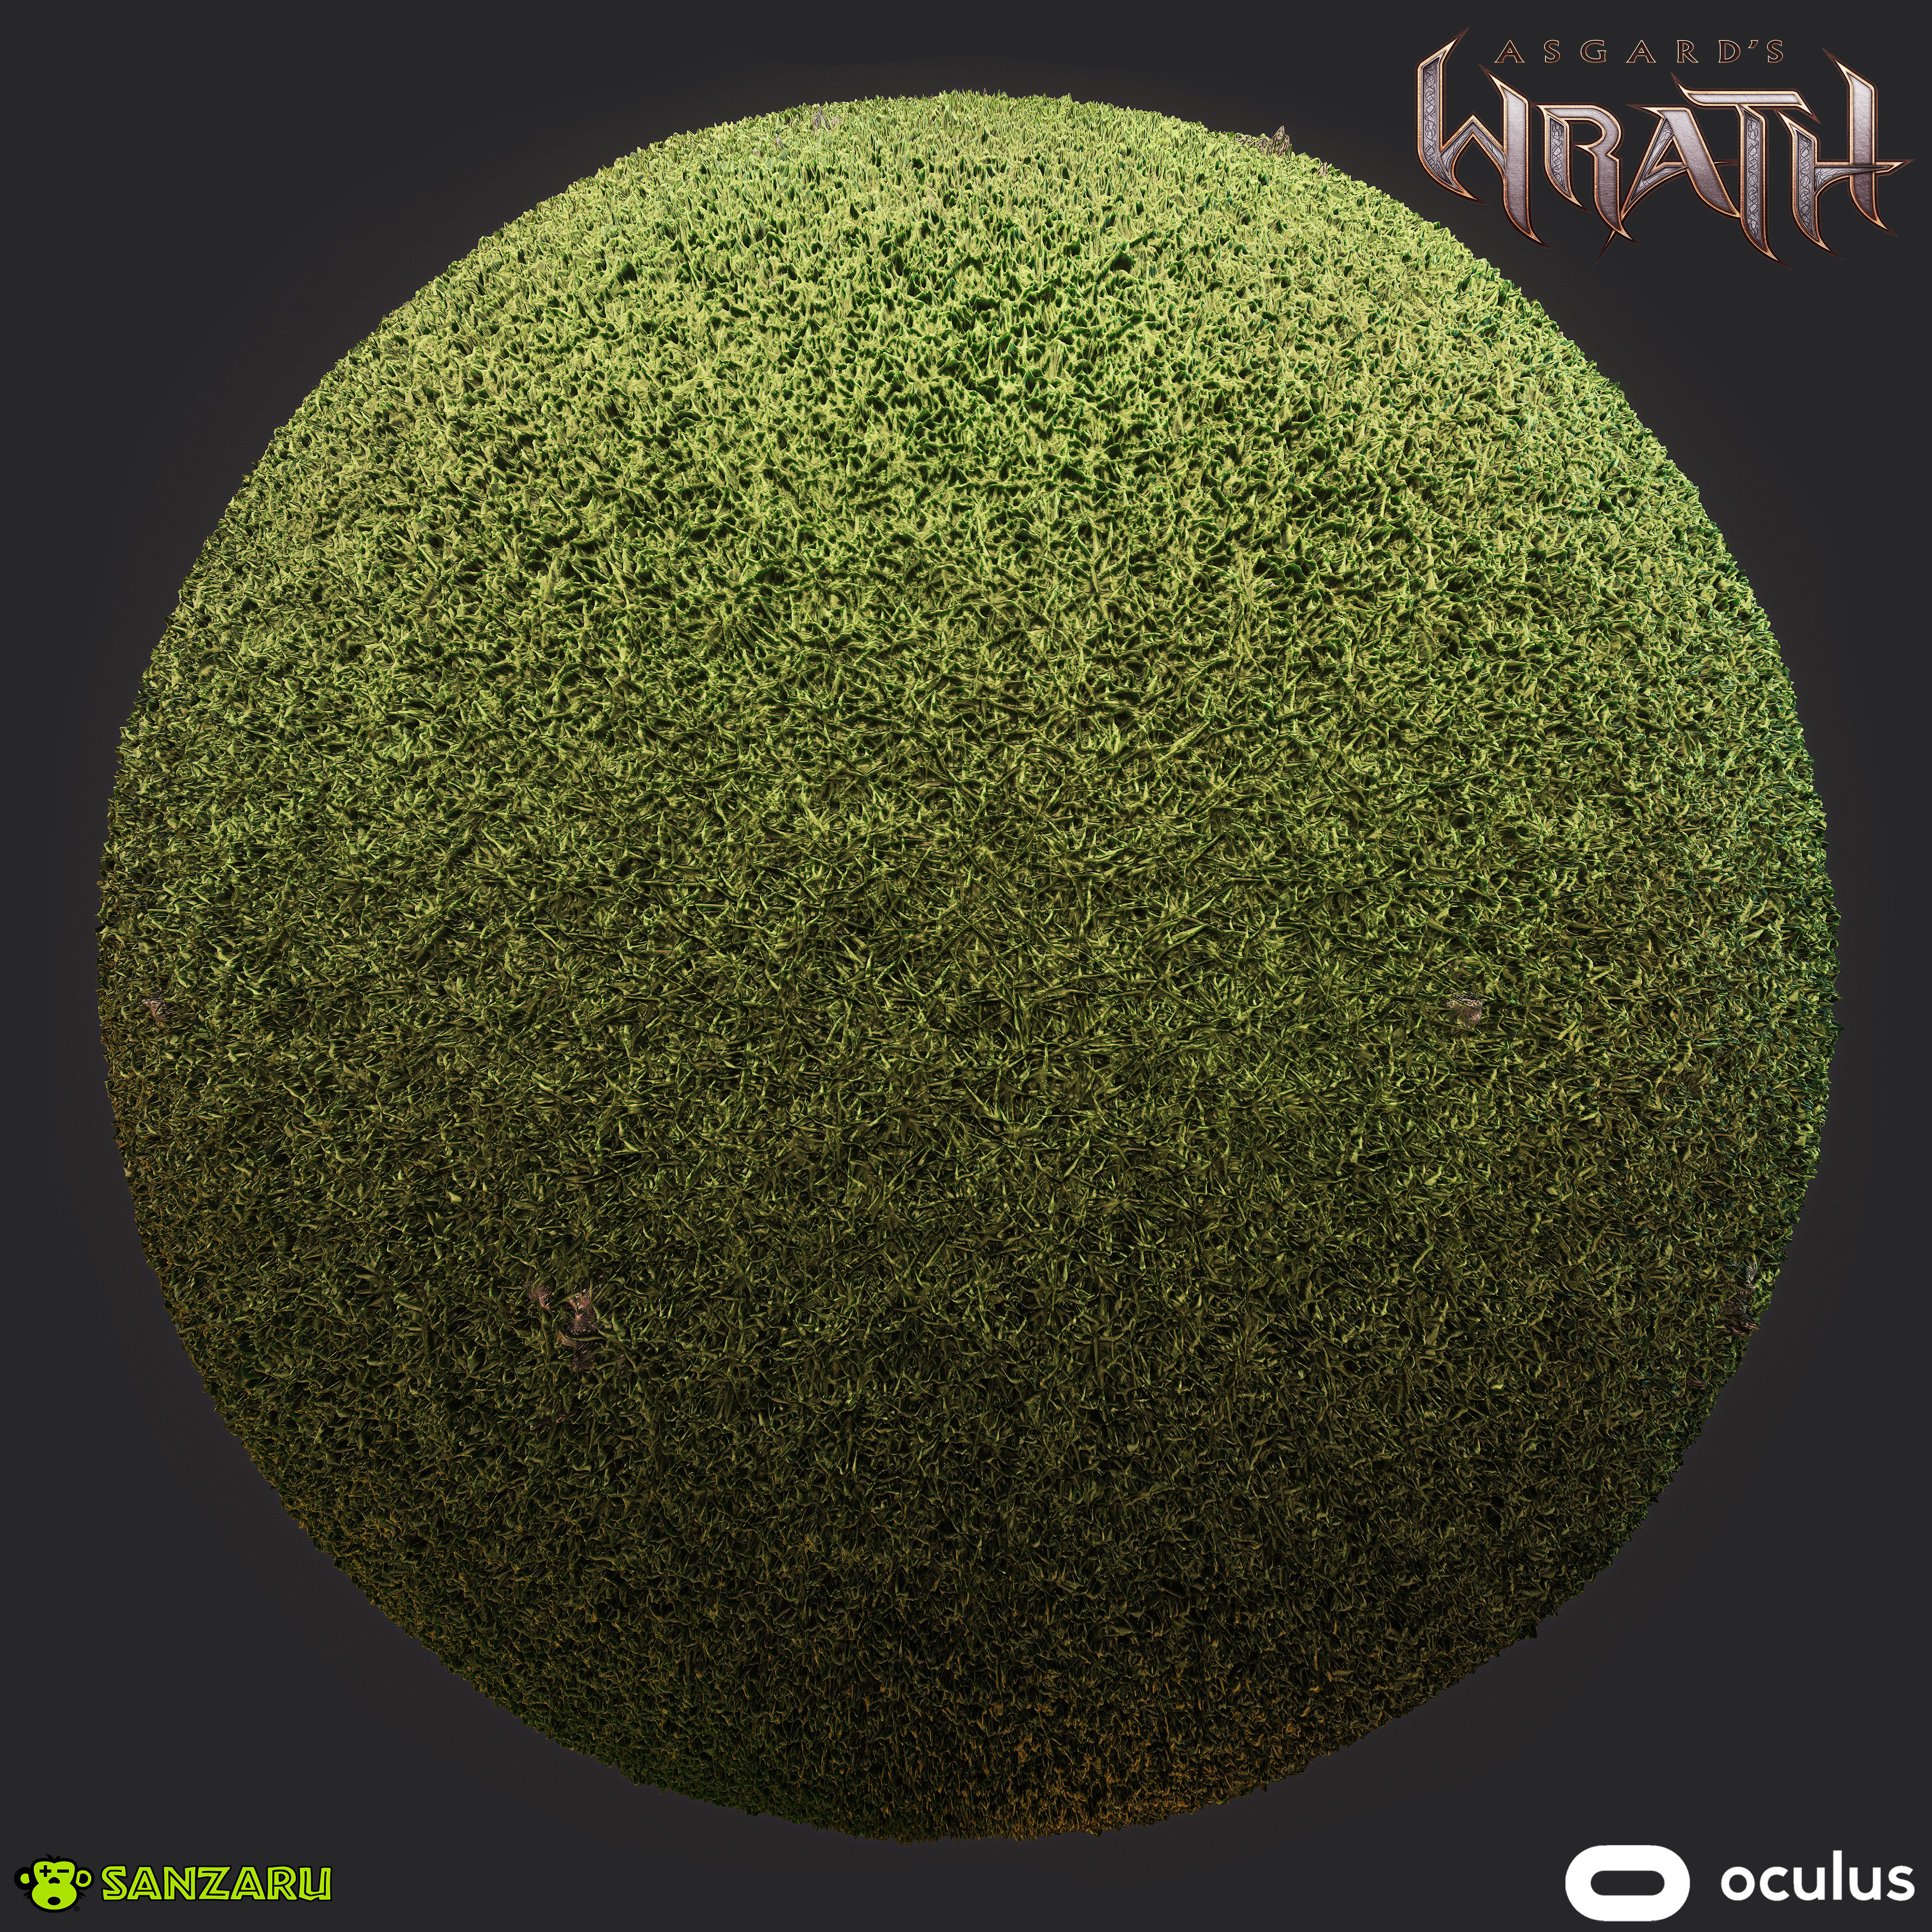 Grass Base- A base material used to blend with dirt and mud in some of the Midgard areas of our game.